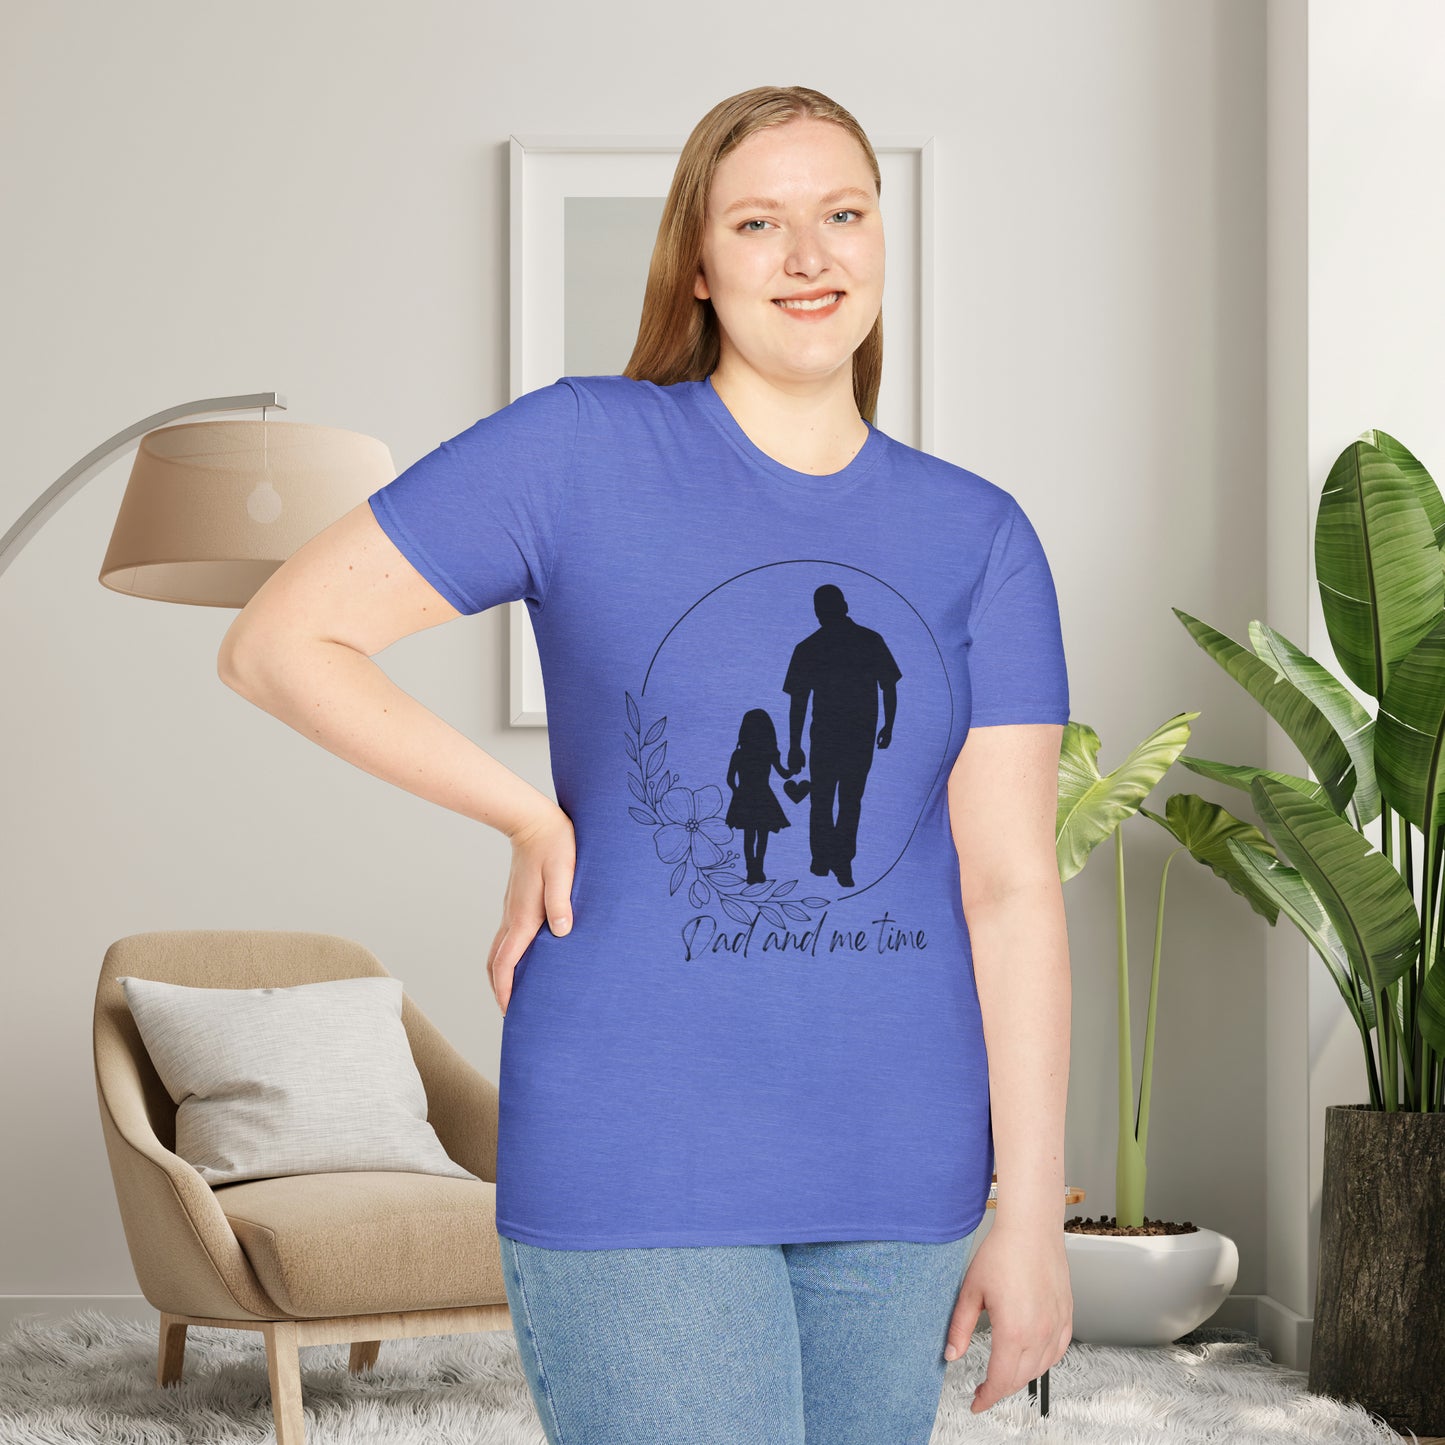 Sweet “Dad and me time” on this Unisex Softstyle T-Shirt. Celebrate Dads taking time to be Dads!